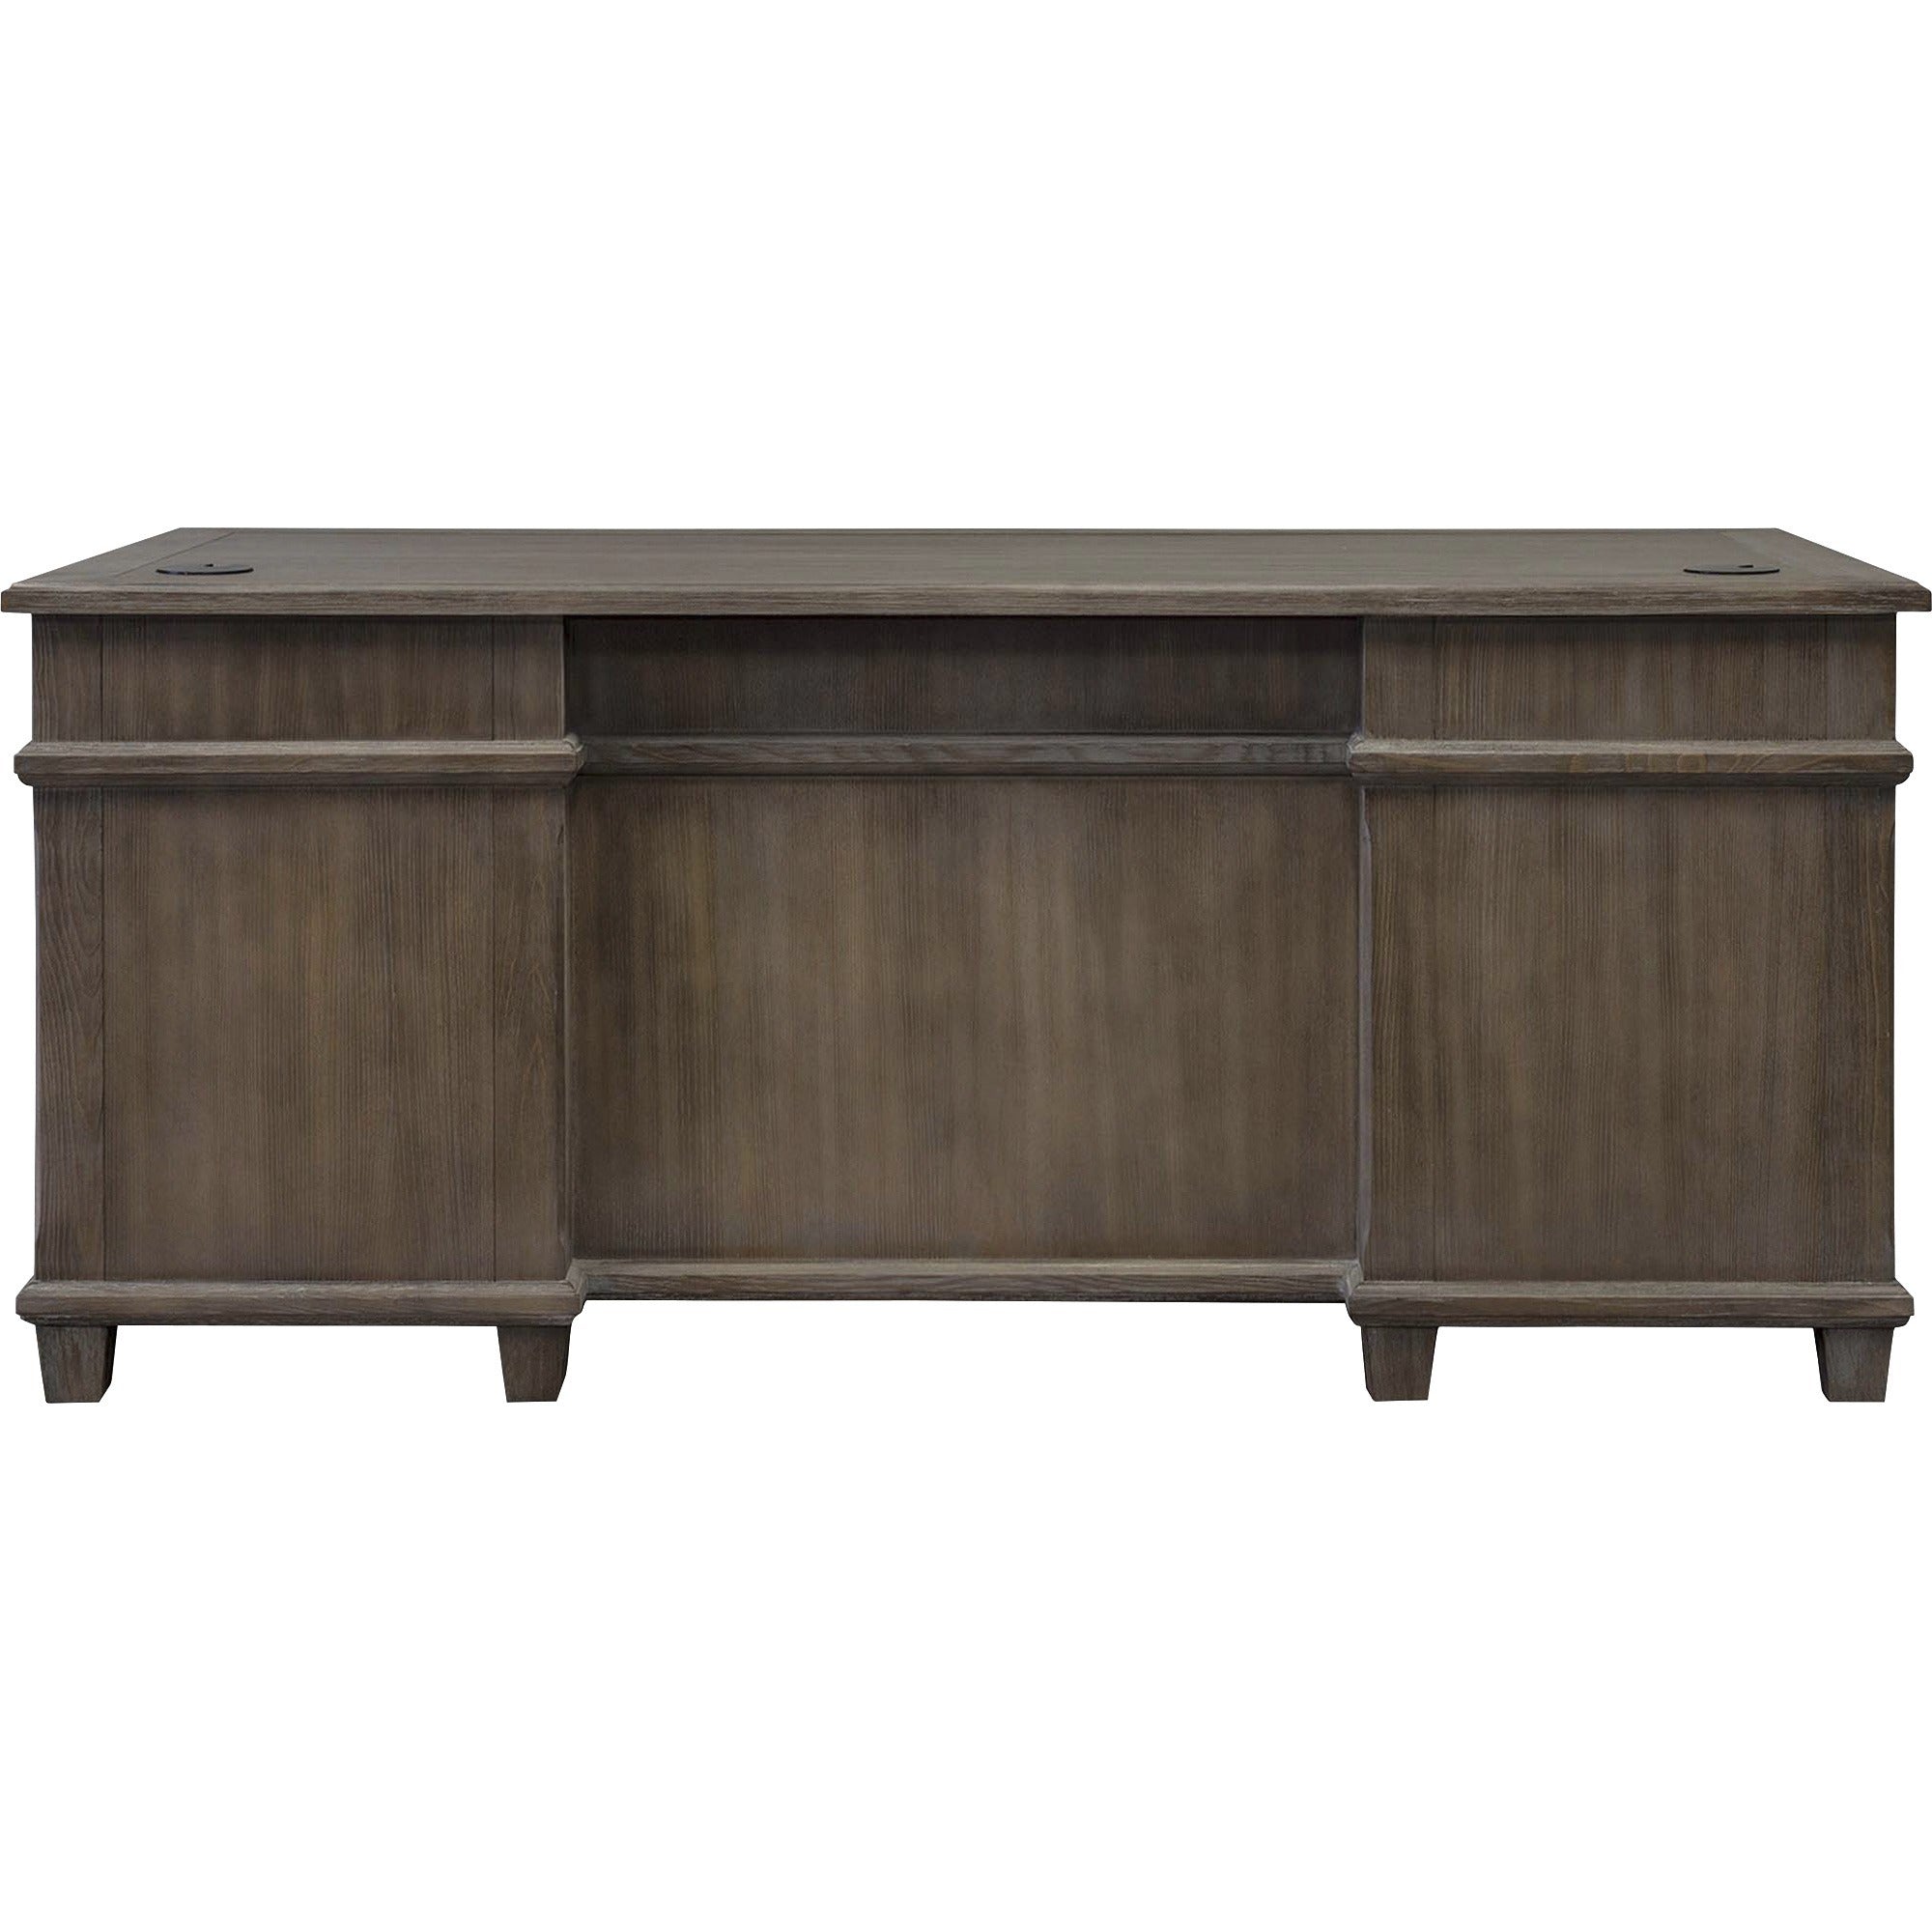 martin-carson-double-pedestal-desk-7-drawer-7-x-storage-utility-file-drawers-double-pedestal-material-veneer-solid-lumber-finish-weathered-dove_mrtimca680 - 4